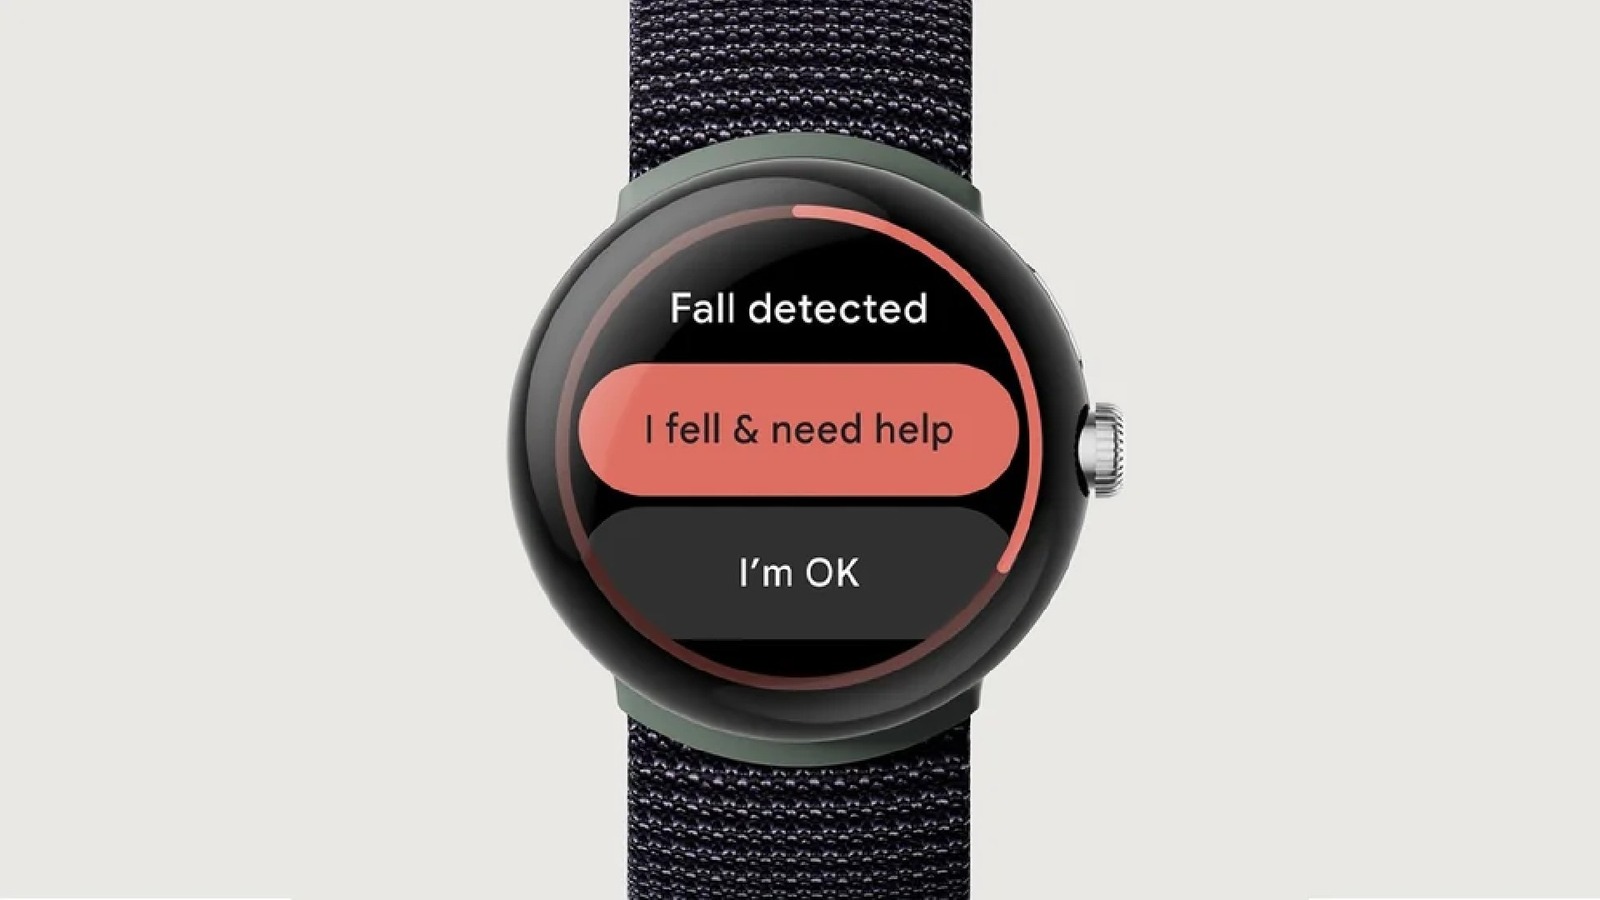 The Google Pixel Watch Finally Has FallDetection After New Update